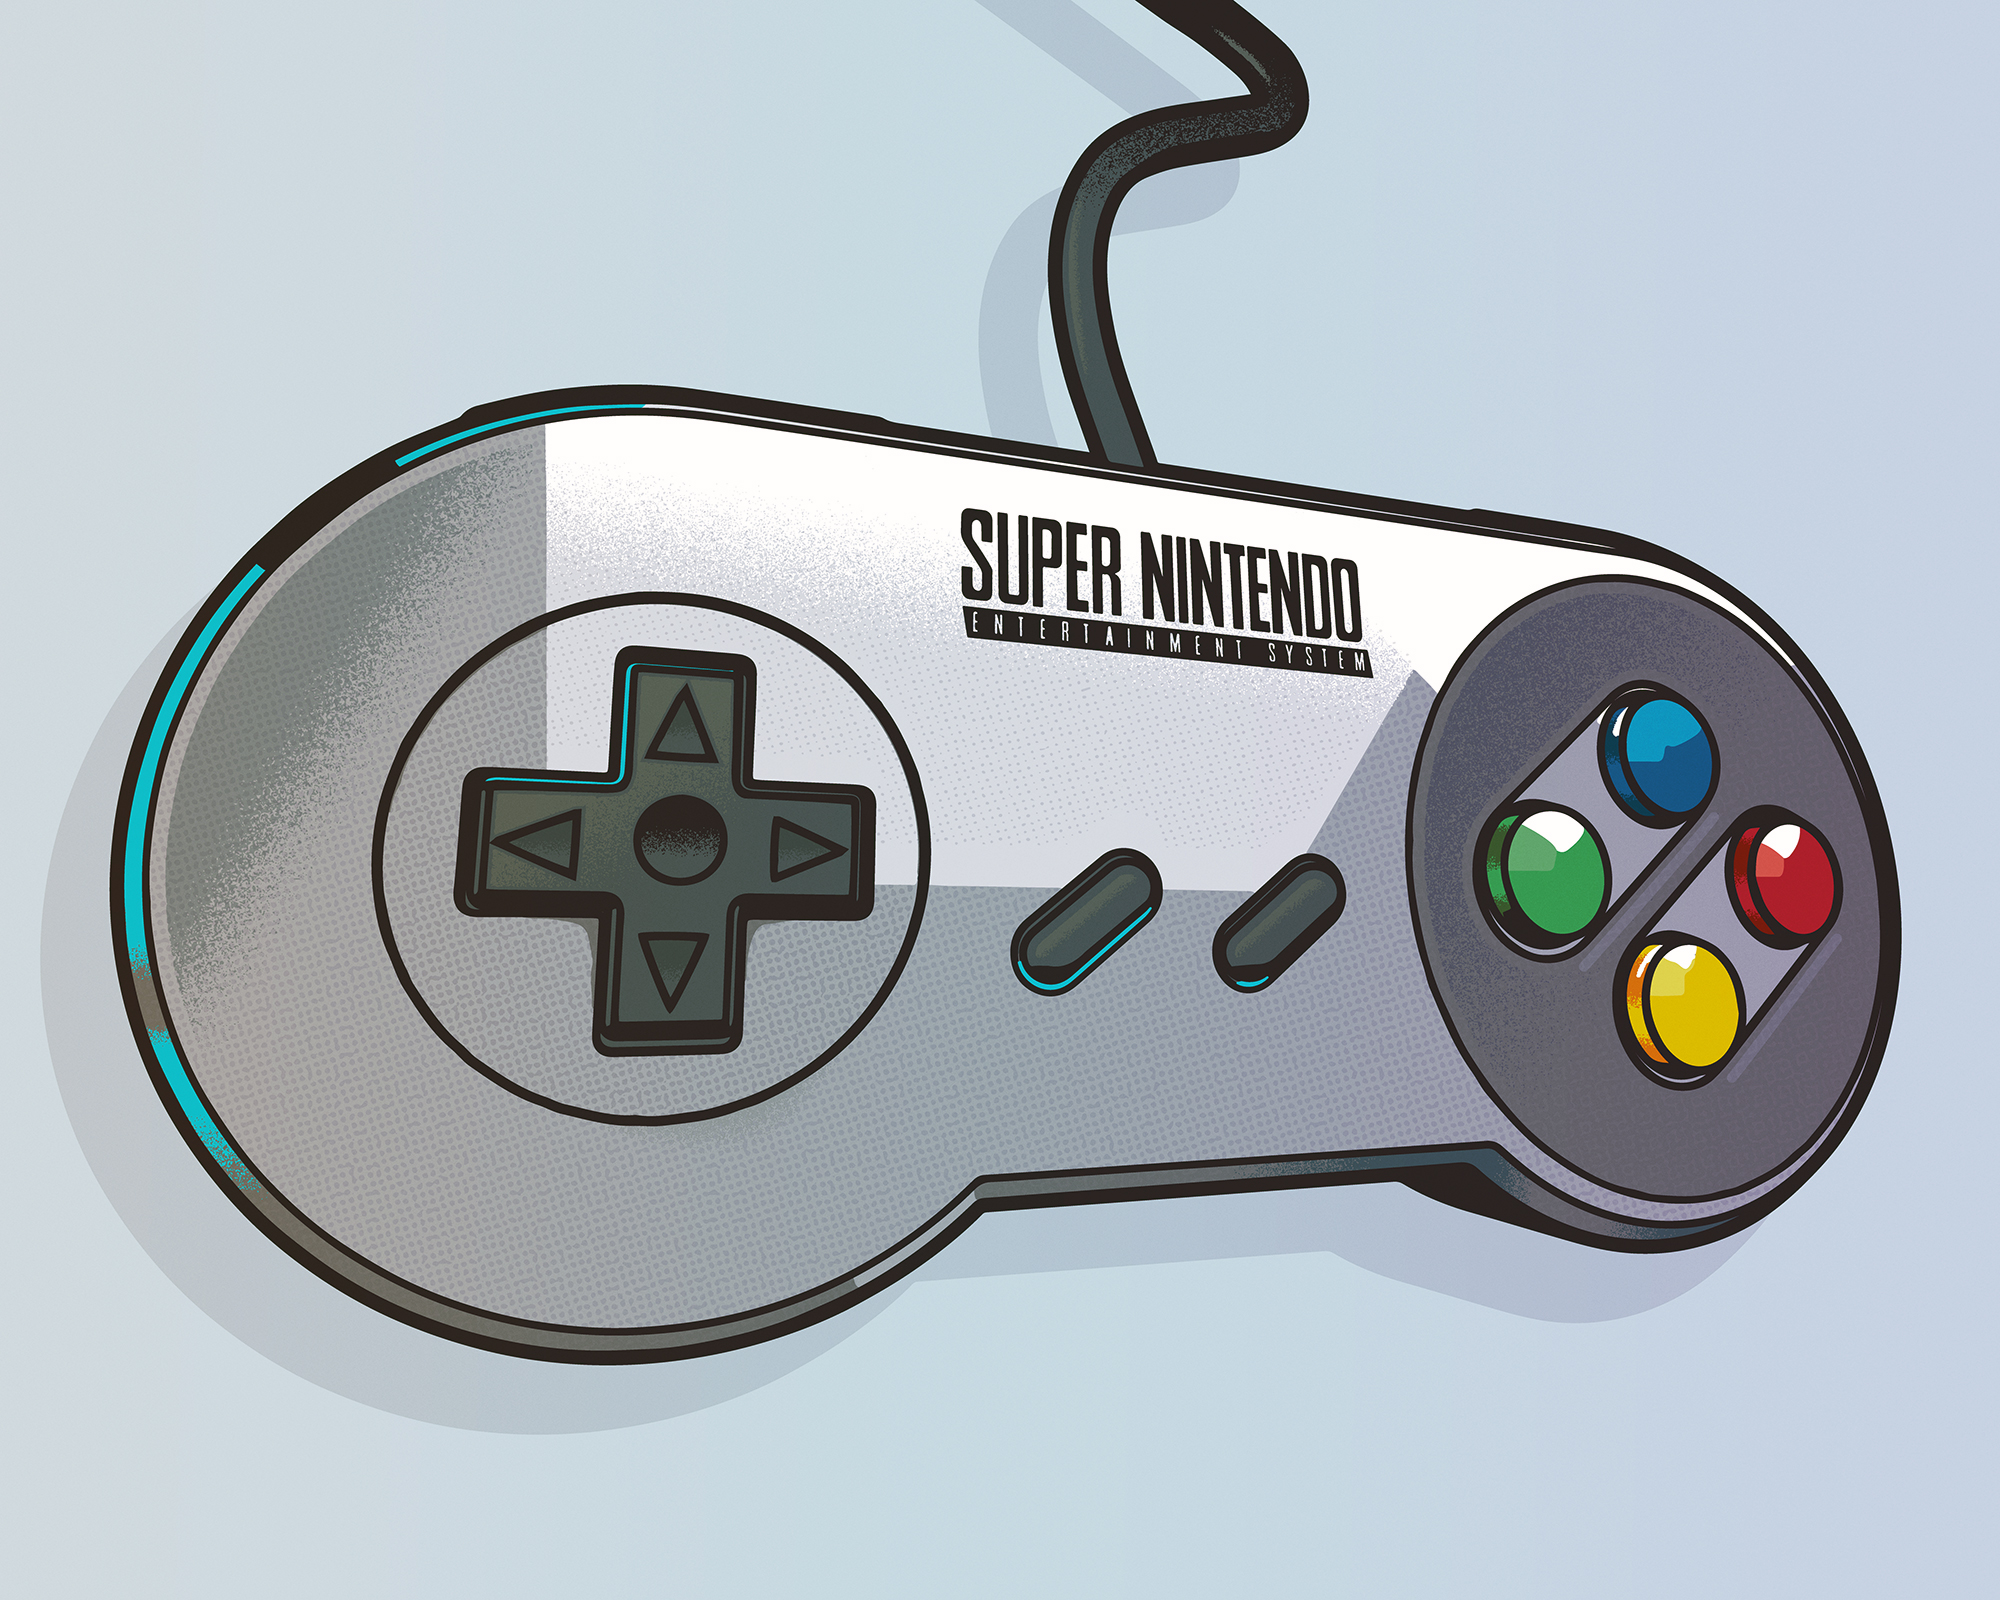 Super Nintendo From The 90s By Bert Musketon